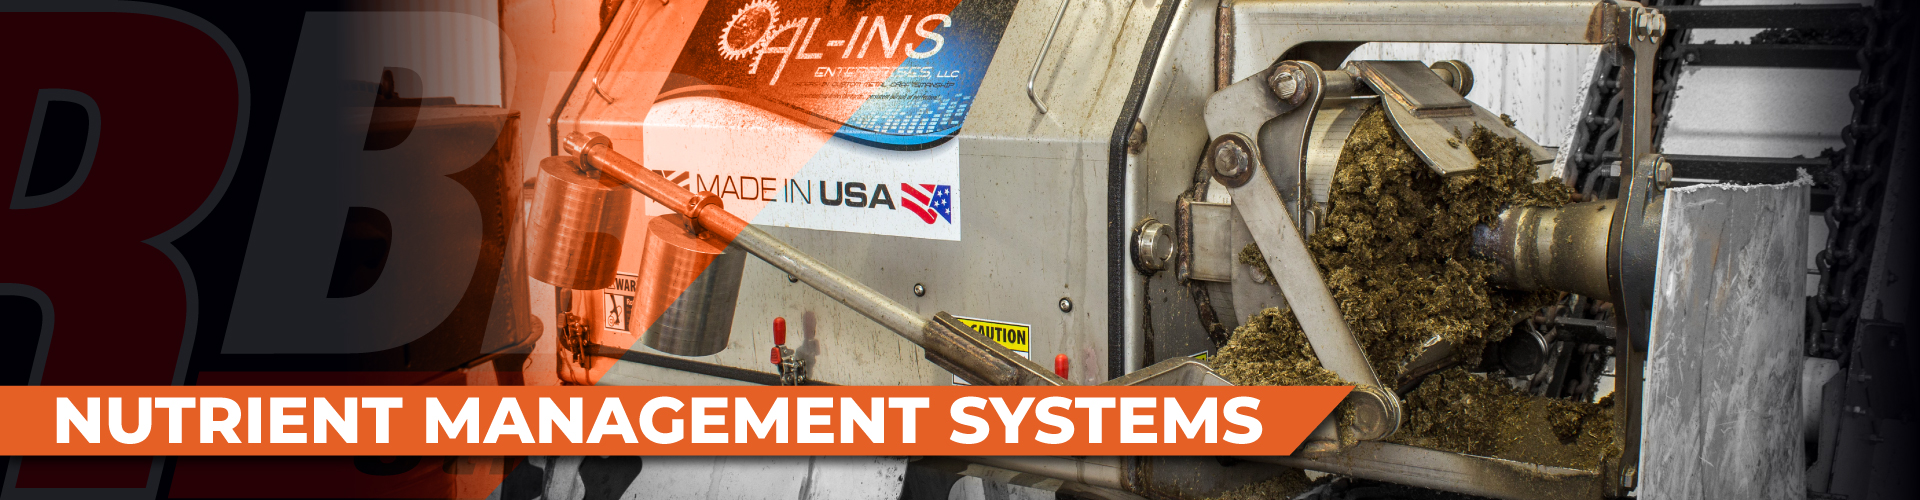 Nutrient Management Systems Banner